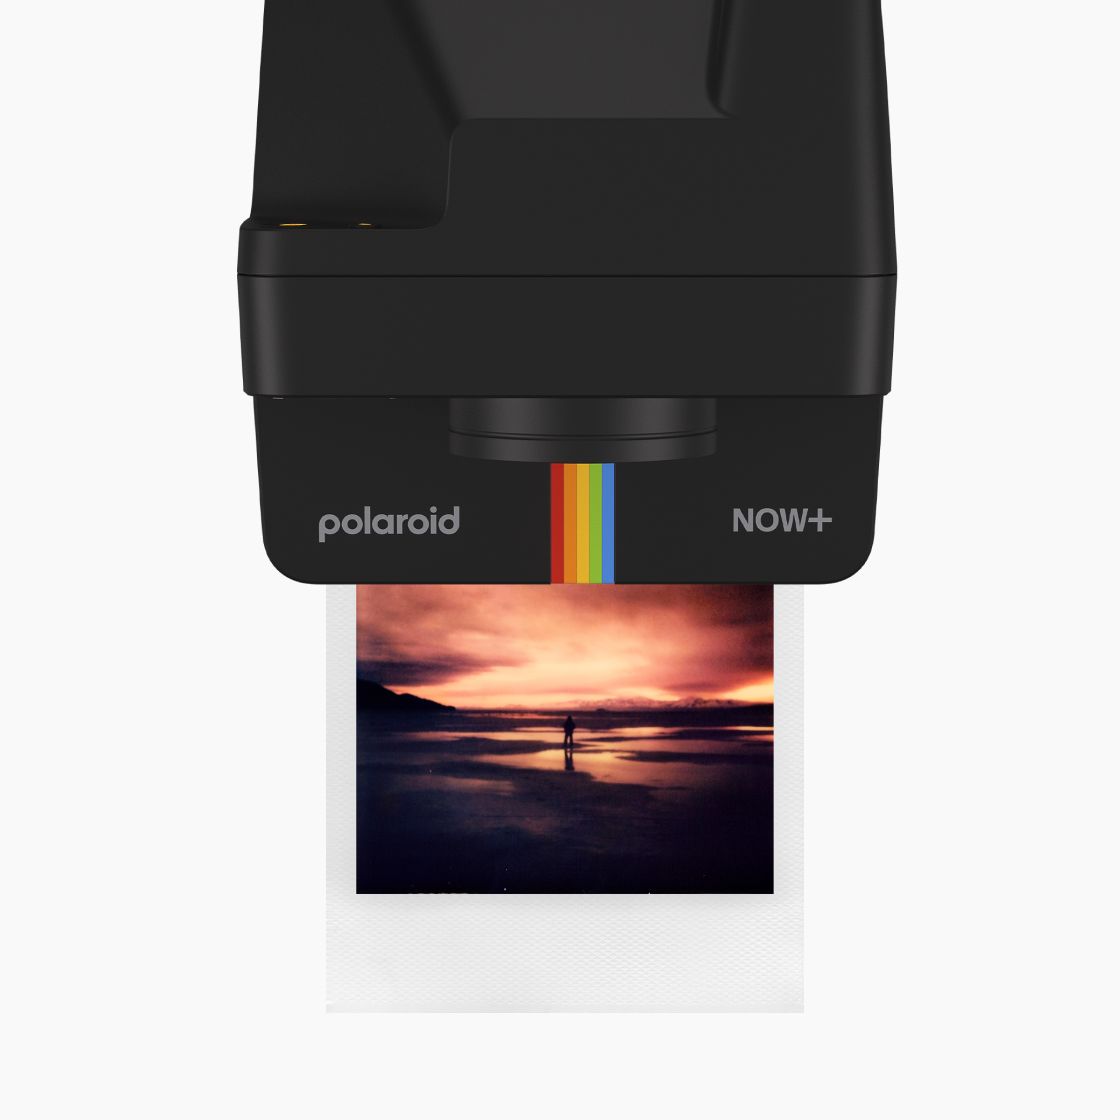 The Polaroid Now+ is only a slight update, but the add-ons are worth it